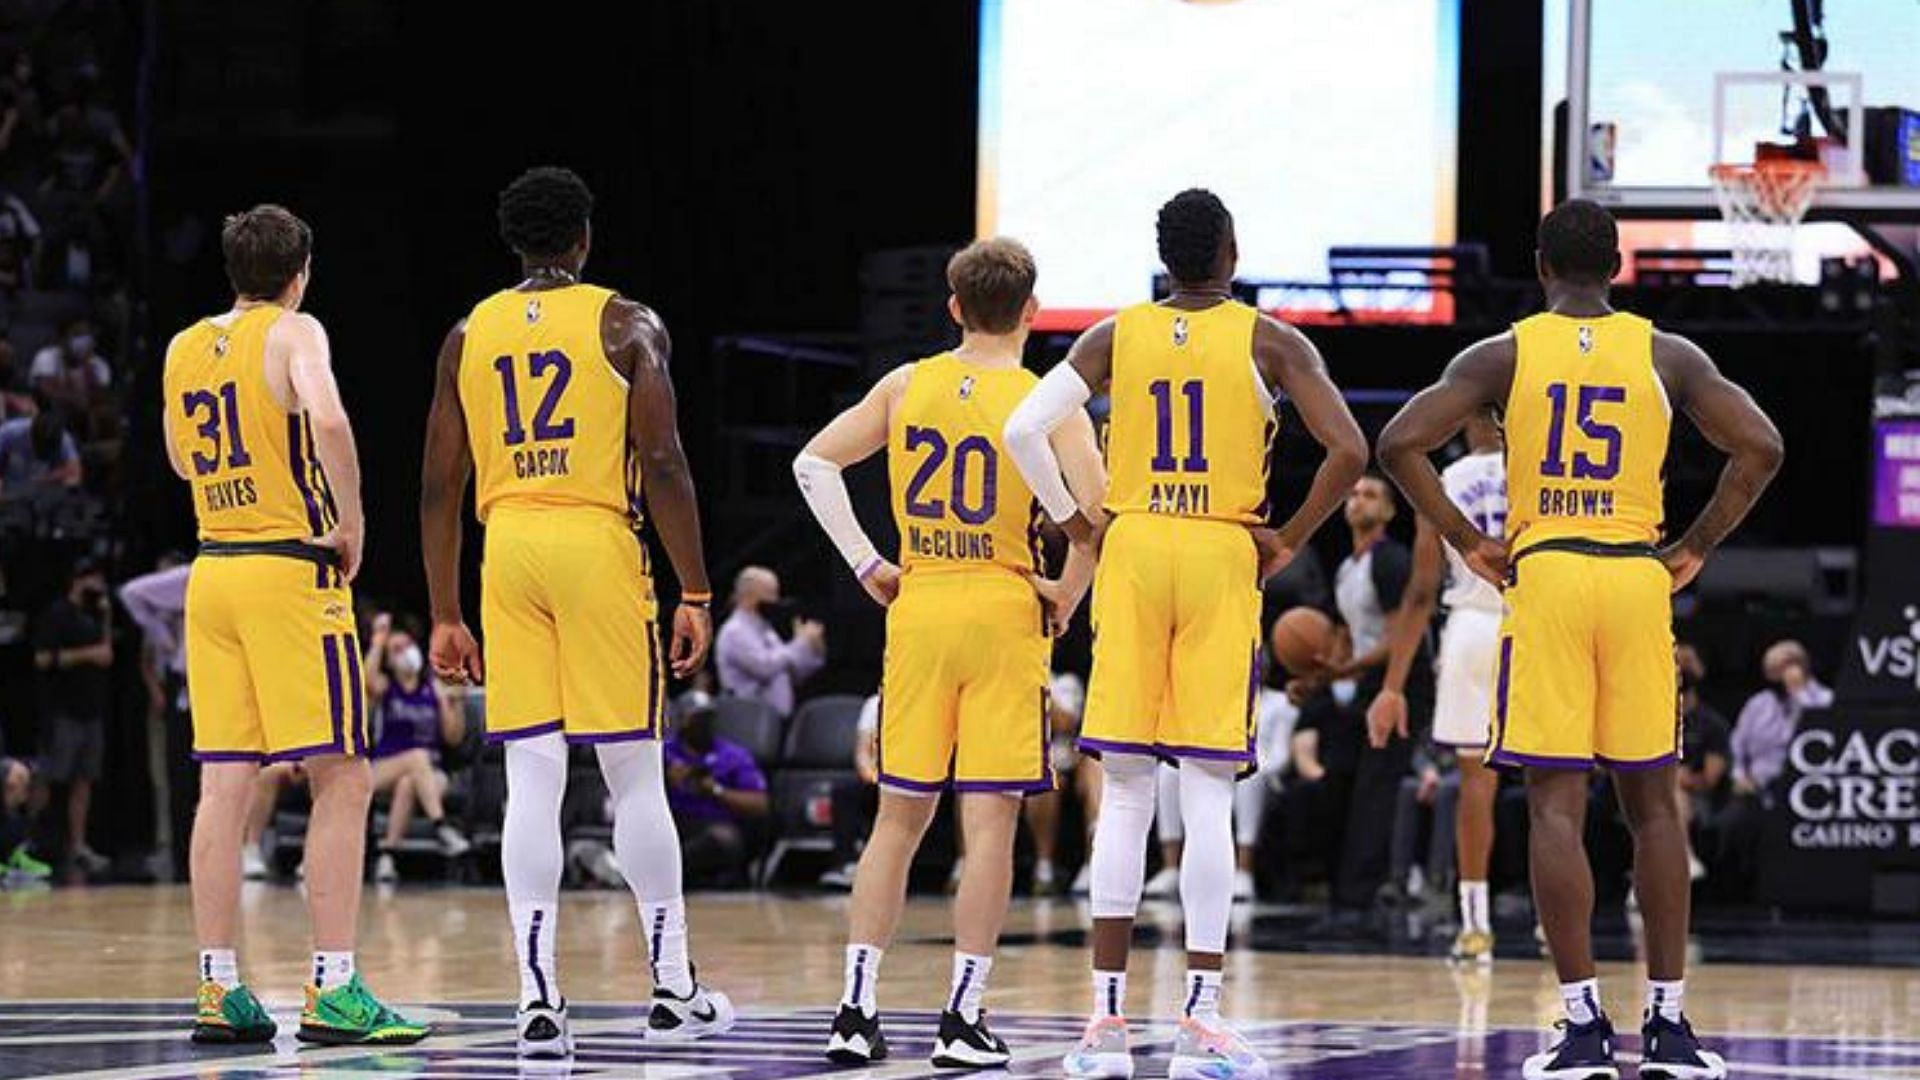 The LA Lakers California Classic team from 2021